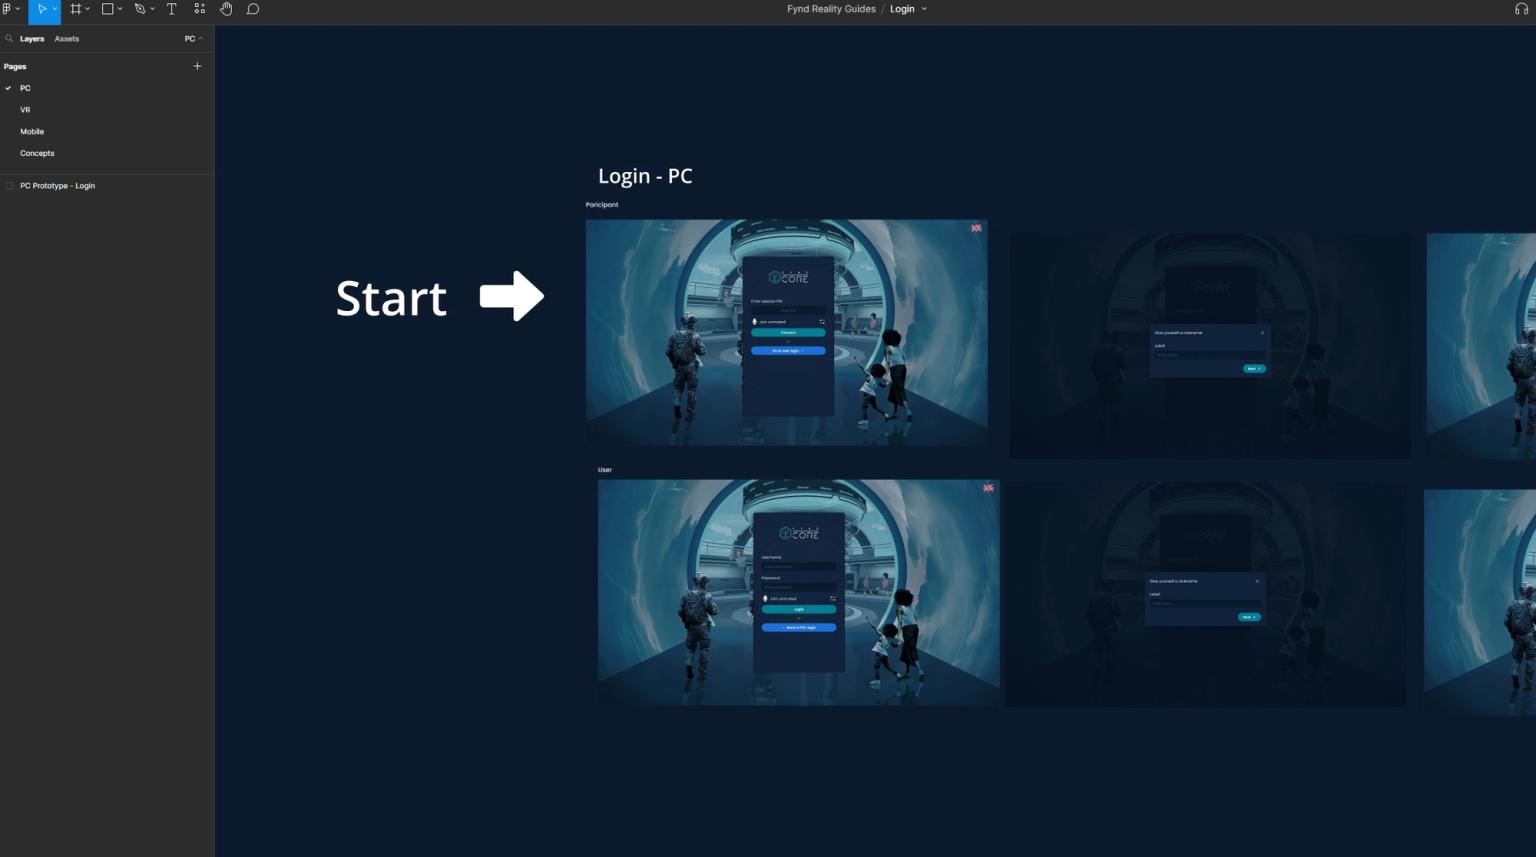 A screenshot from Figma showing how we structured our Login Menu. There is a bar on the left side showing the pages which are seperated into PC, VR, Mobile and concepts. The window on the right is showing the Login menus for PC.